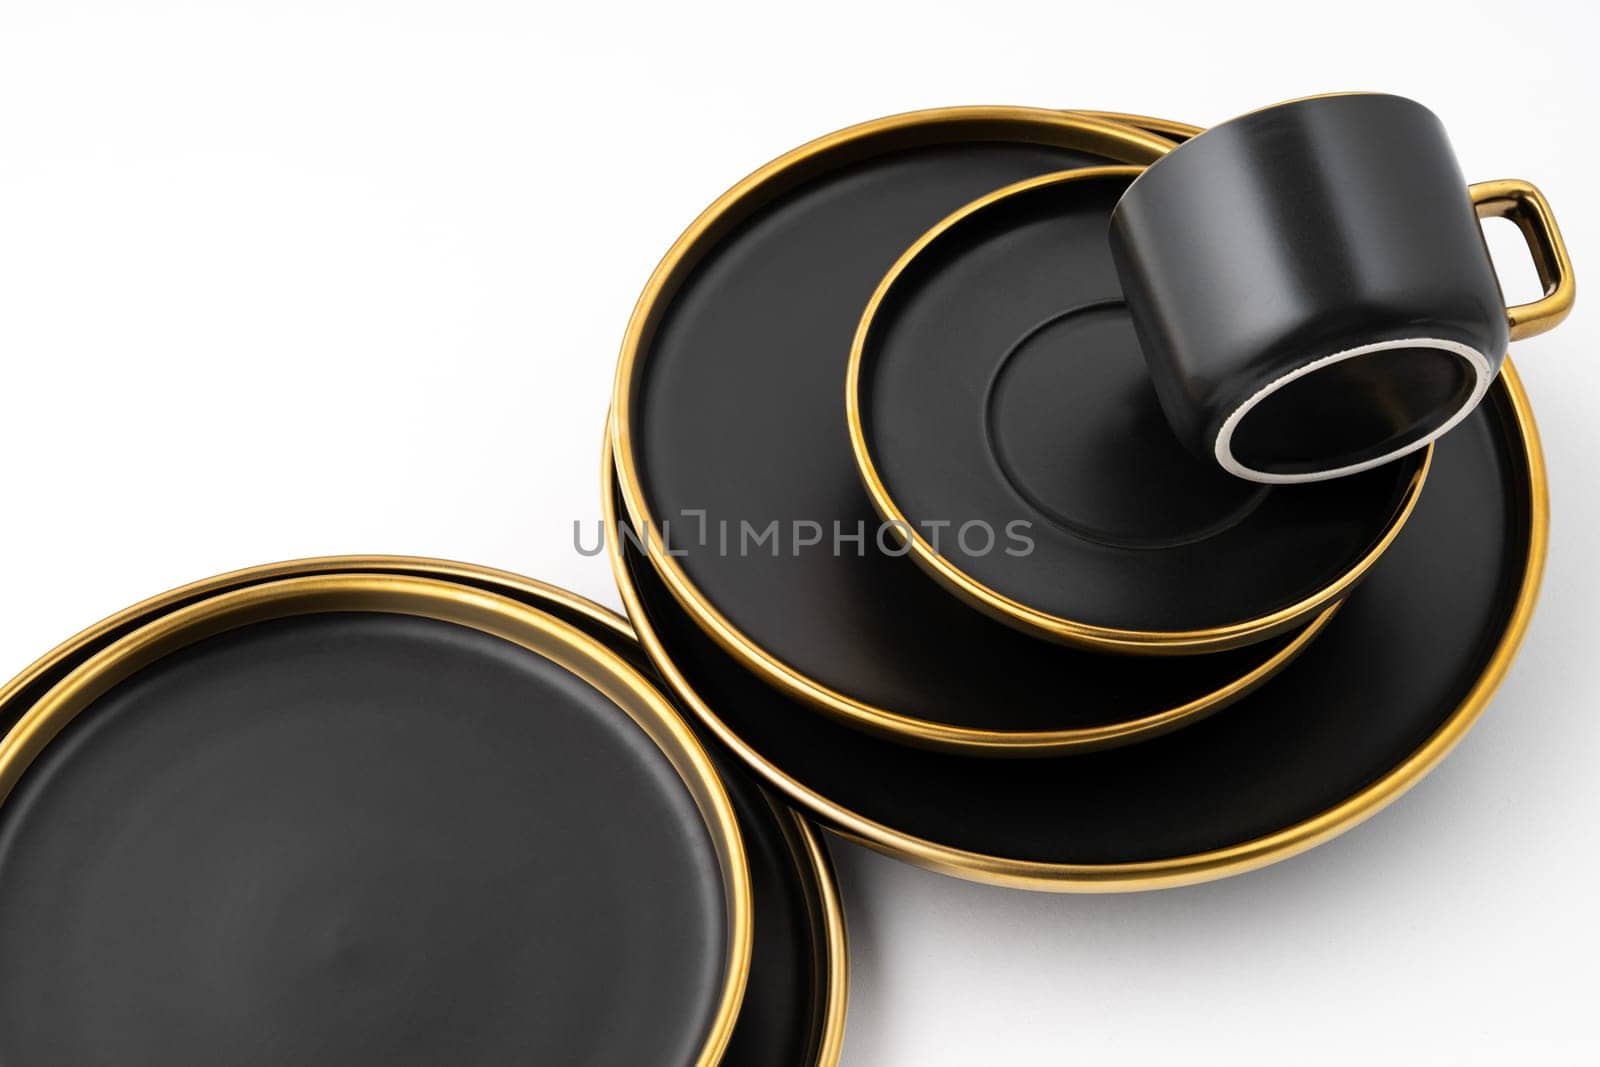 A set of black and golden ceramic plates and cup on a white background by A_Karim